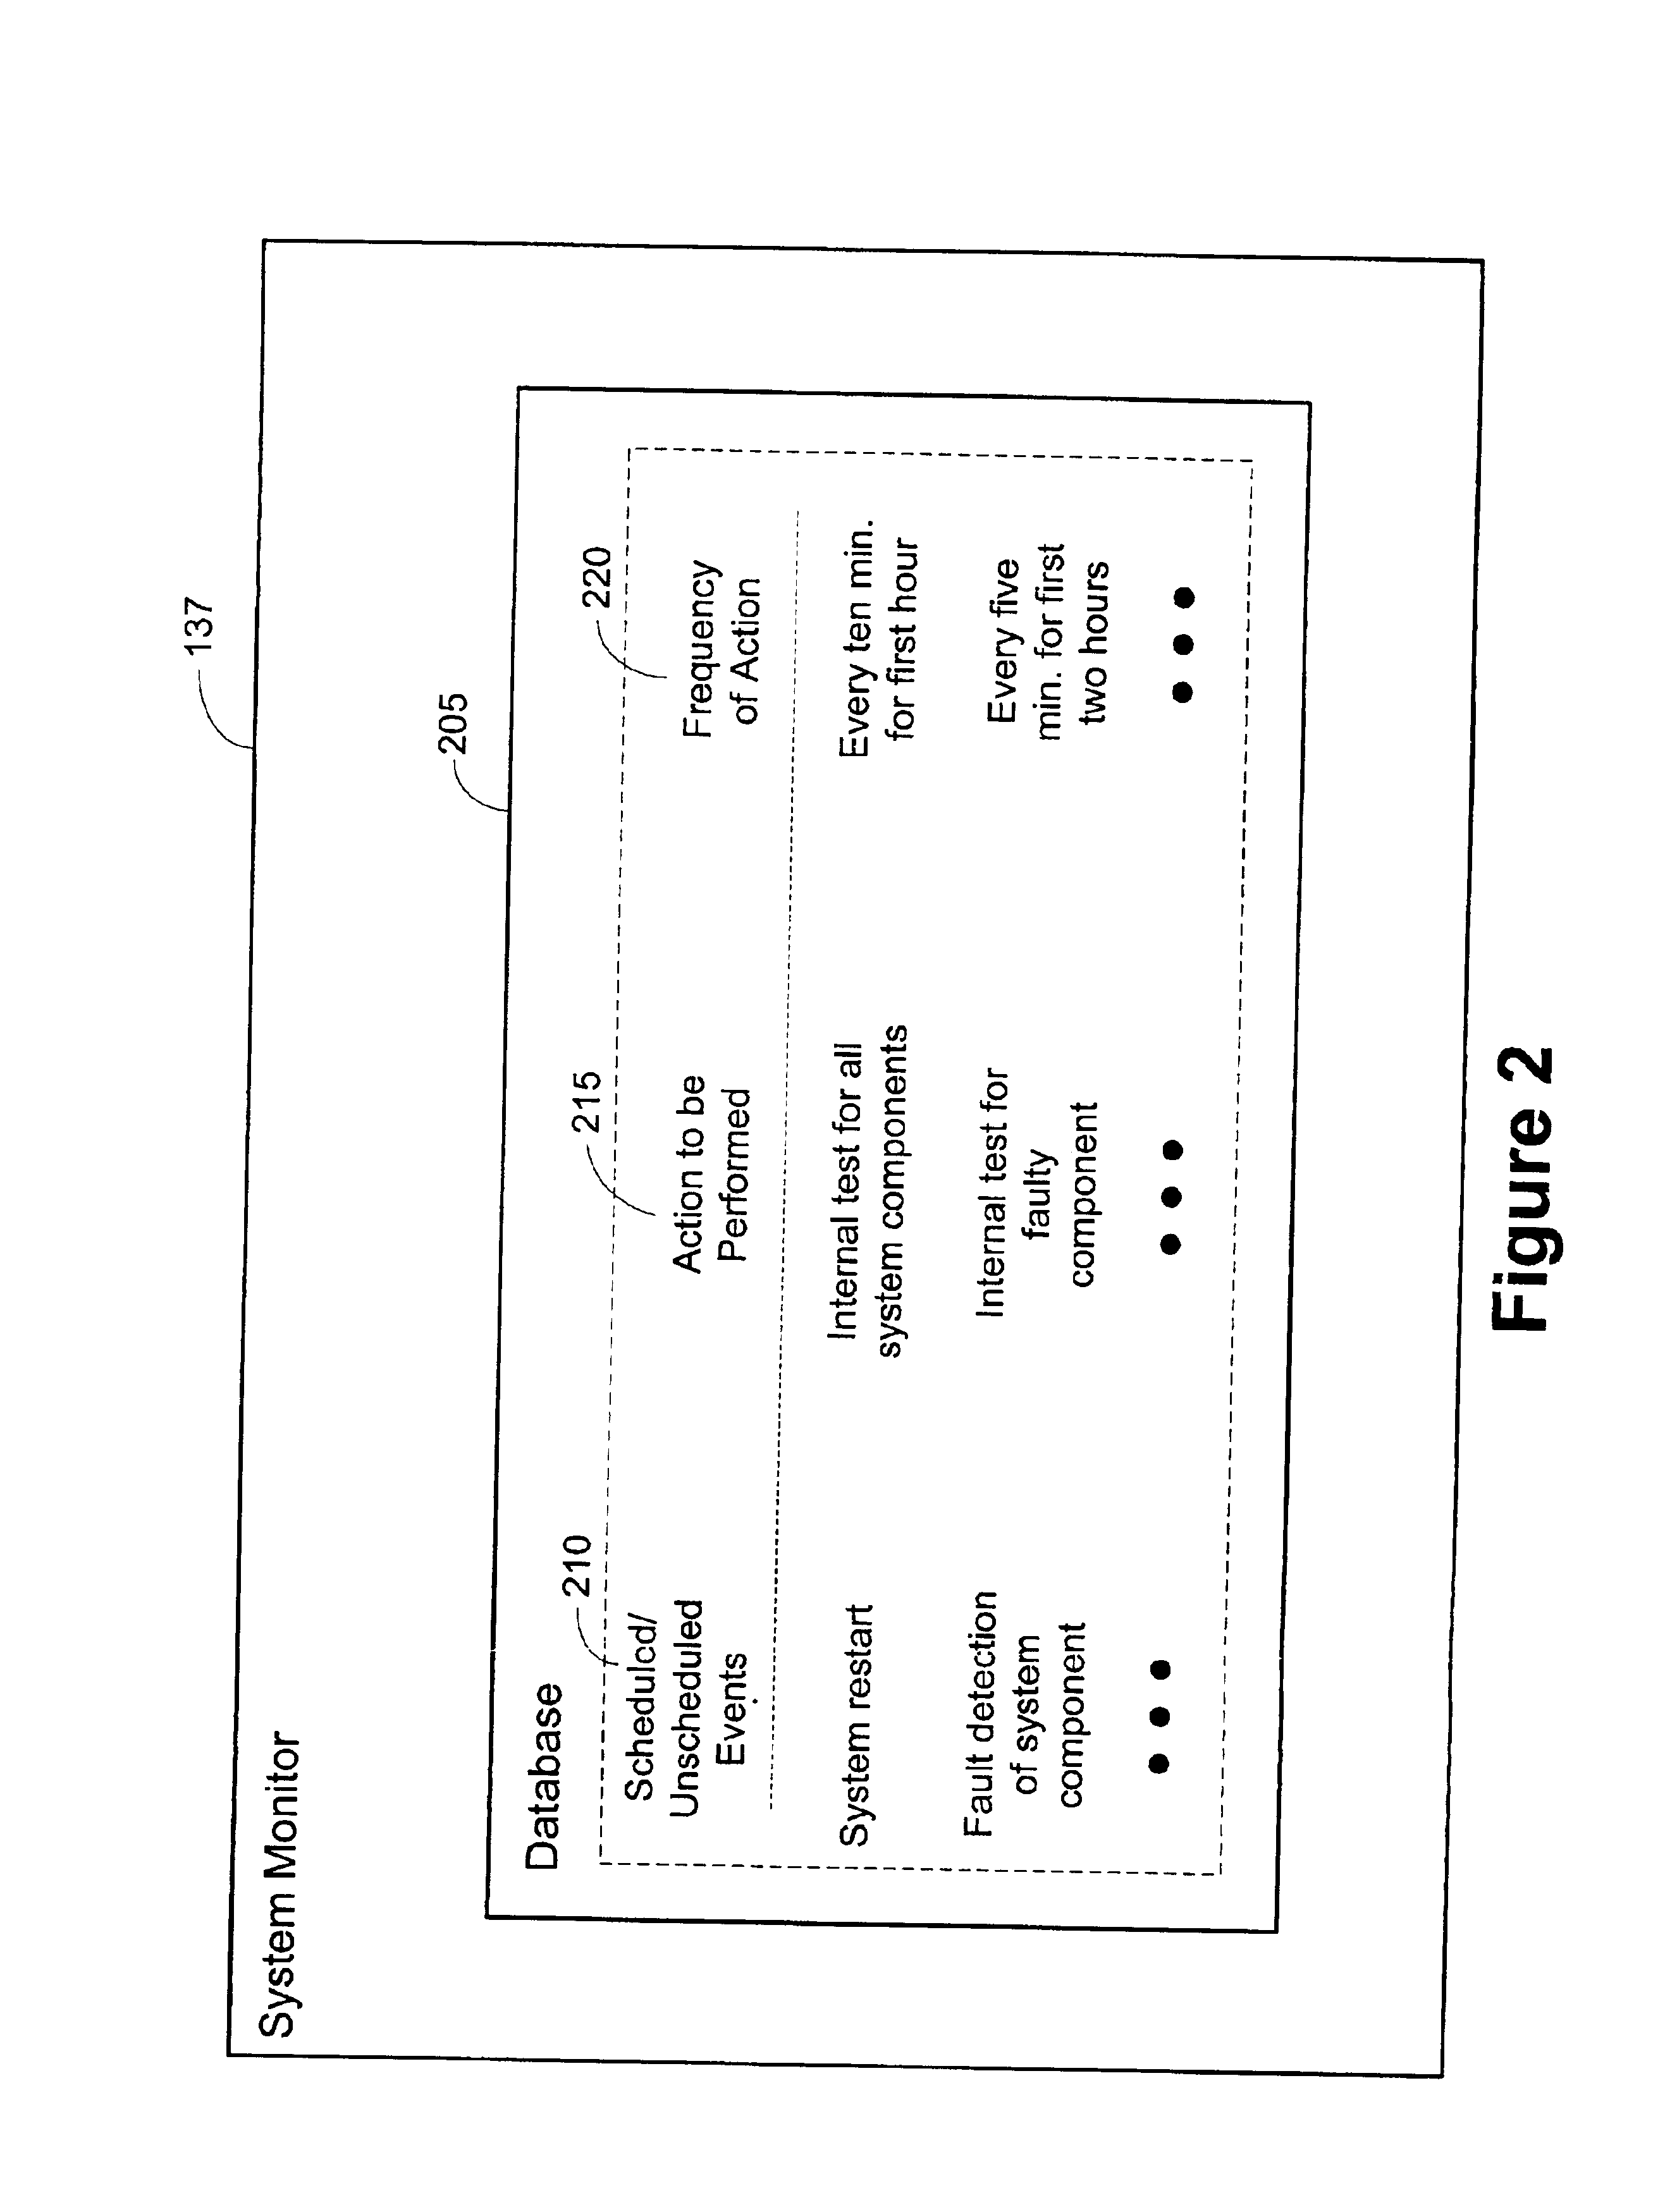 Method and apparatus for dynamically monitoring system components in an advanced process control (APC) framework